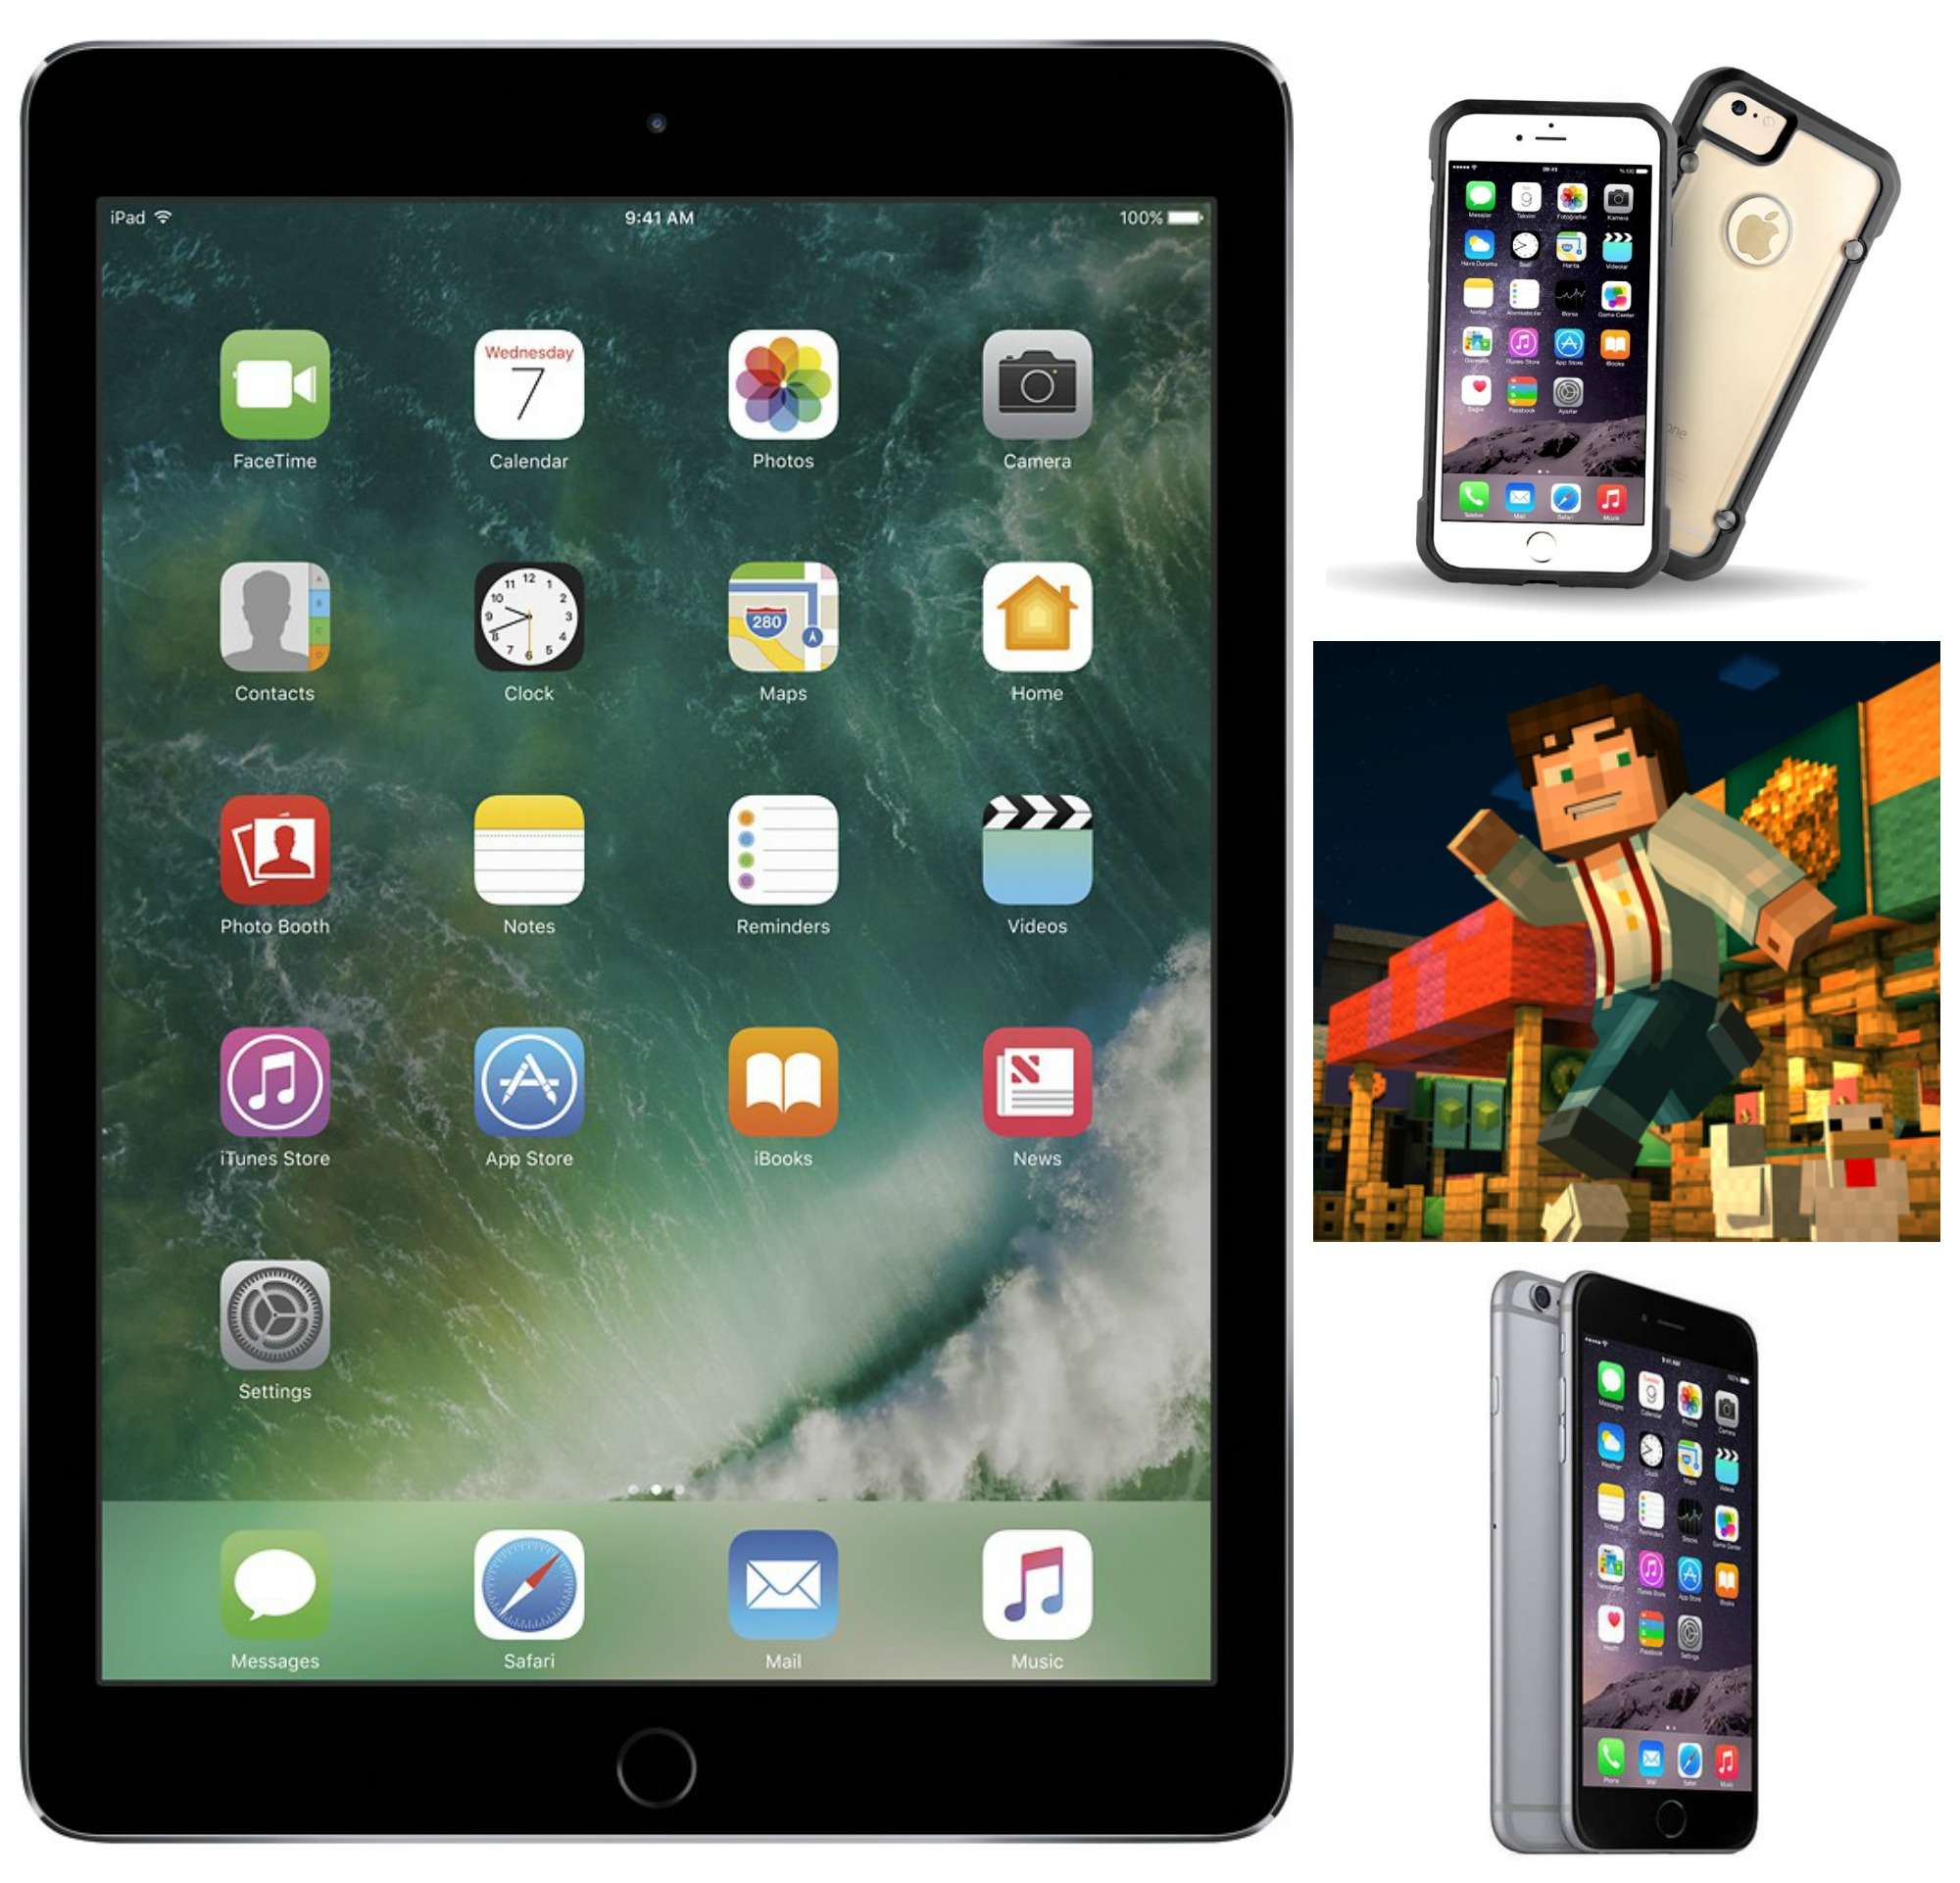 Snag great deals on iPads and iPhones, plus cases to cover them and a hot game to play on them.